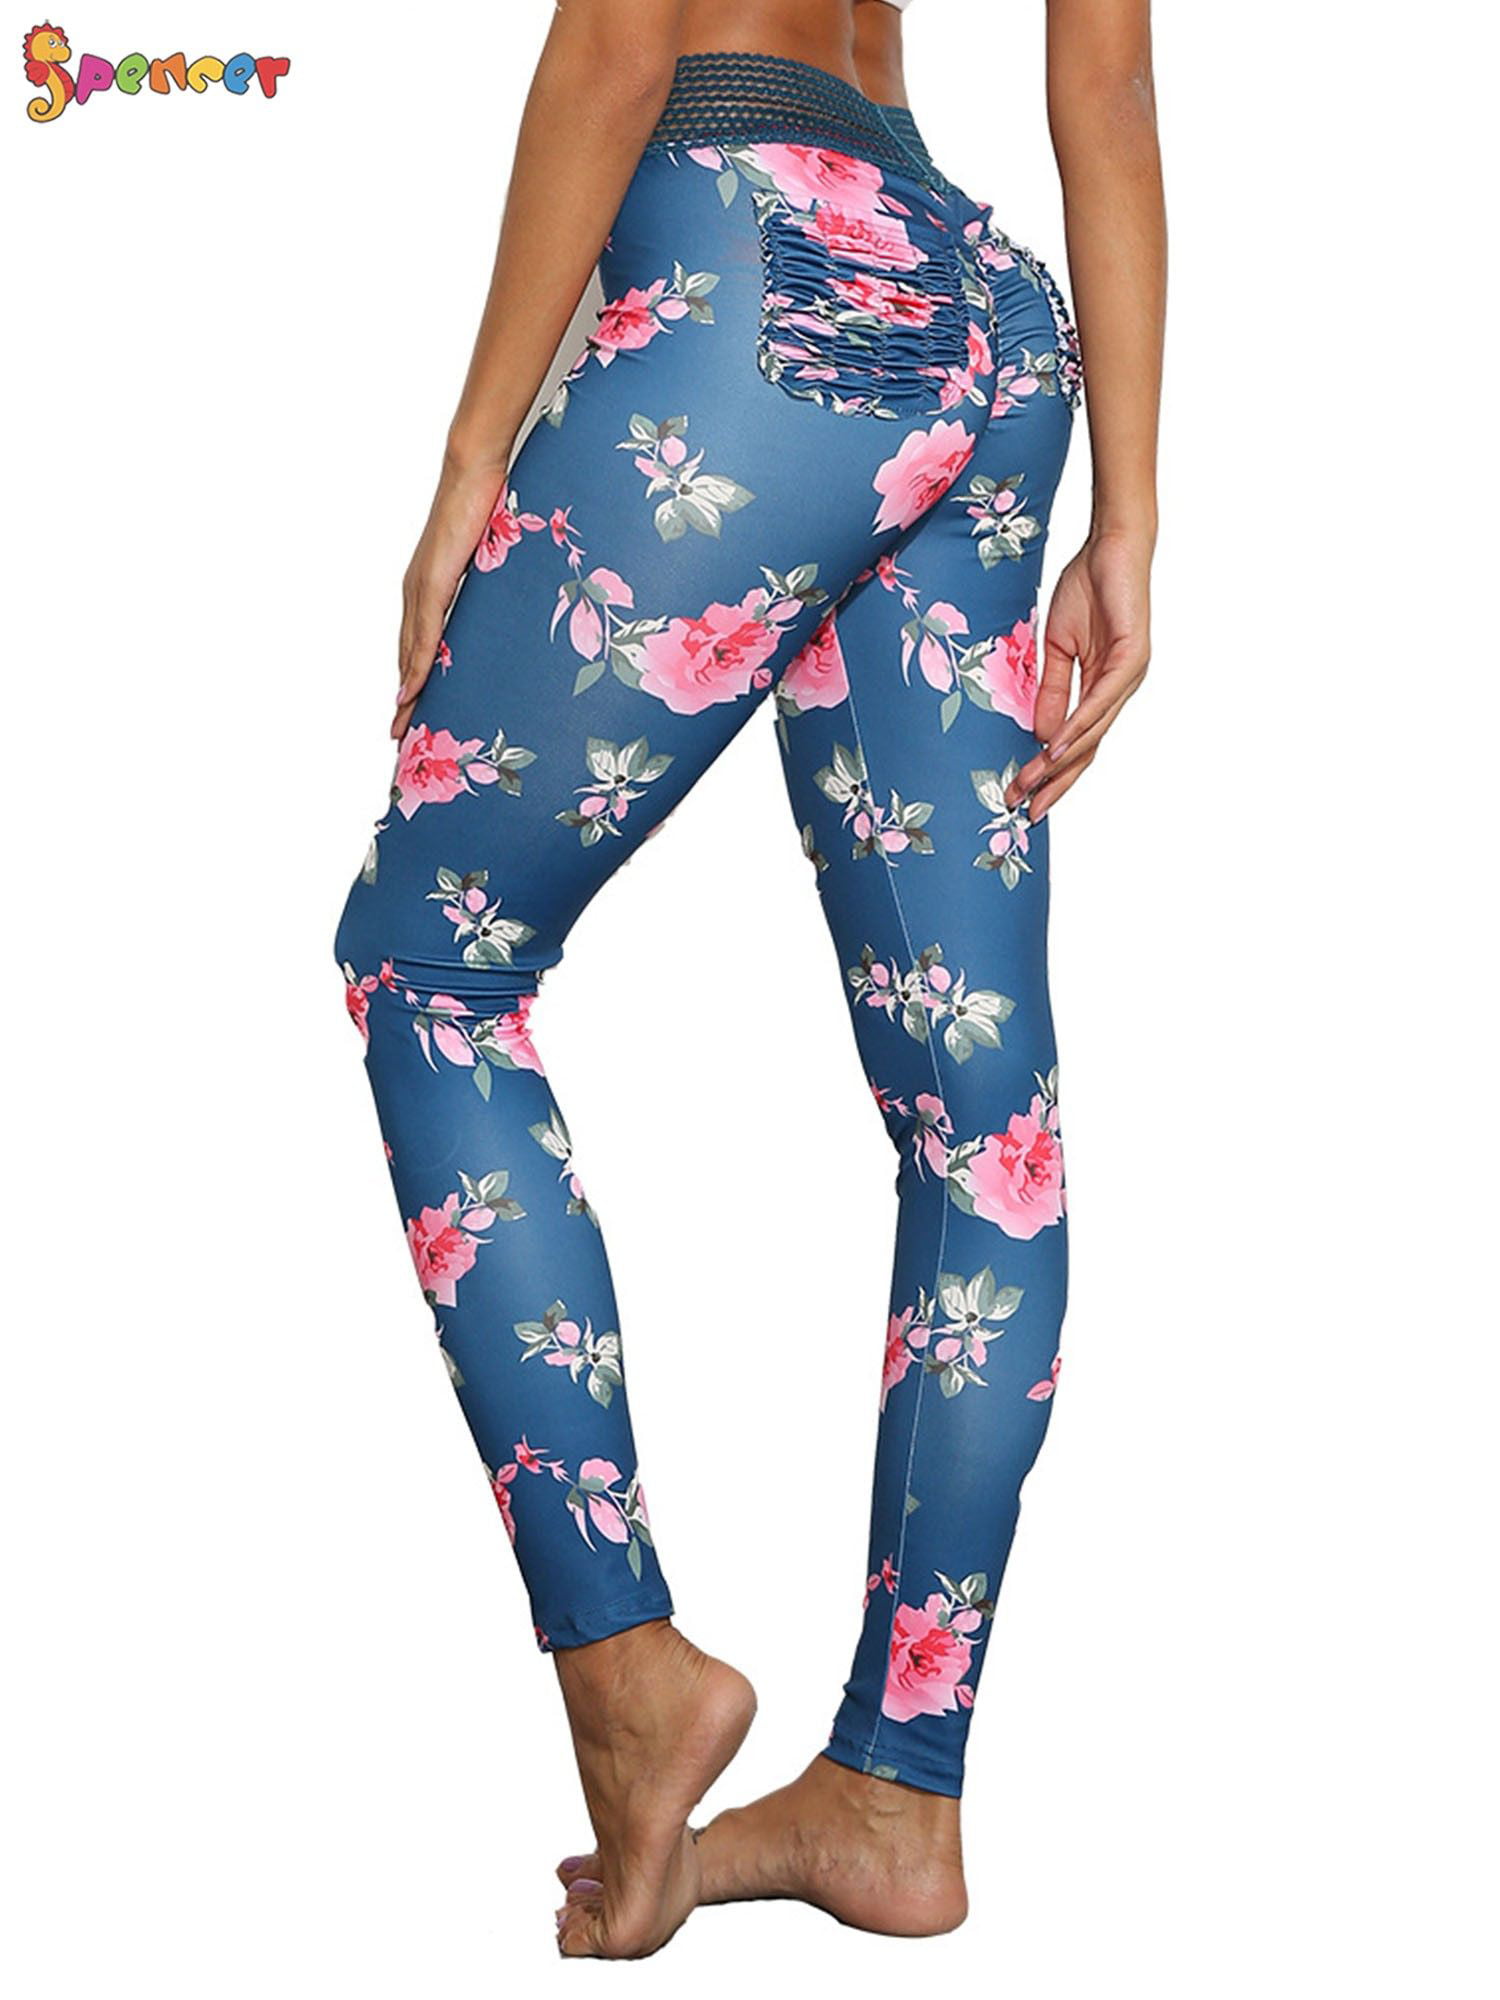 Women Yoga Pants High Waisted Floral Sport Gym Leggings Running Fitness Trousers